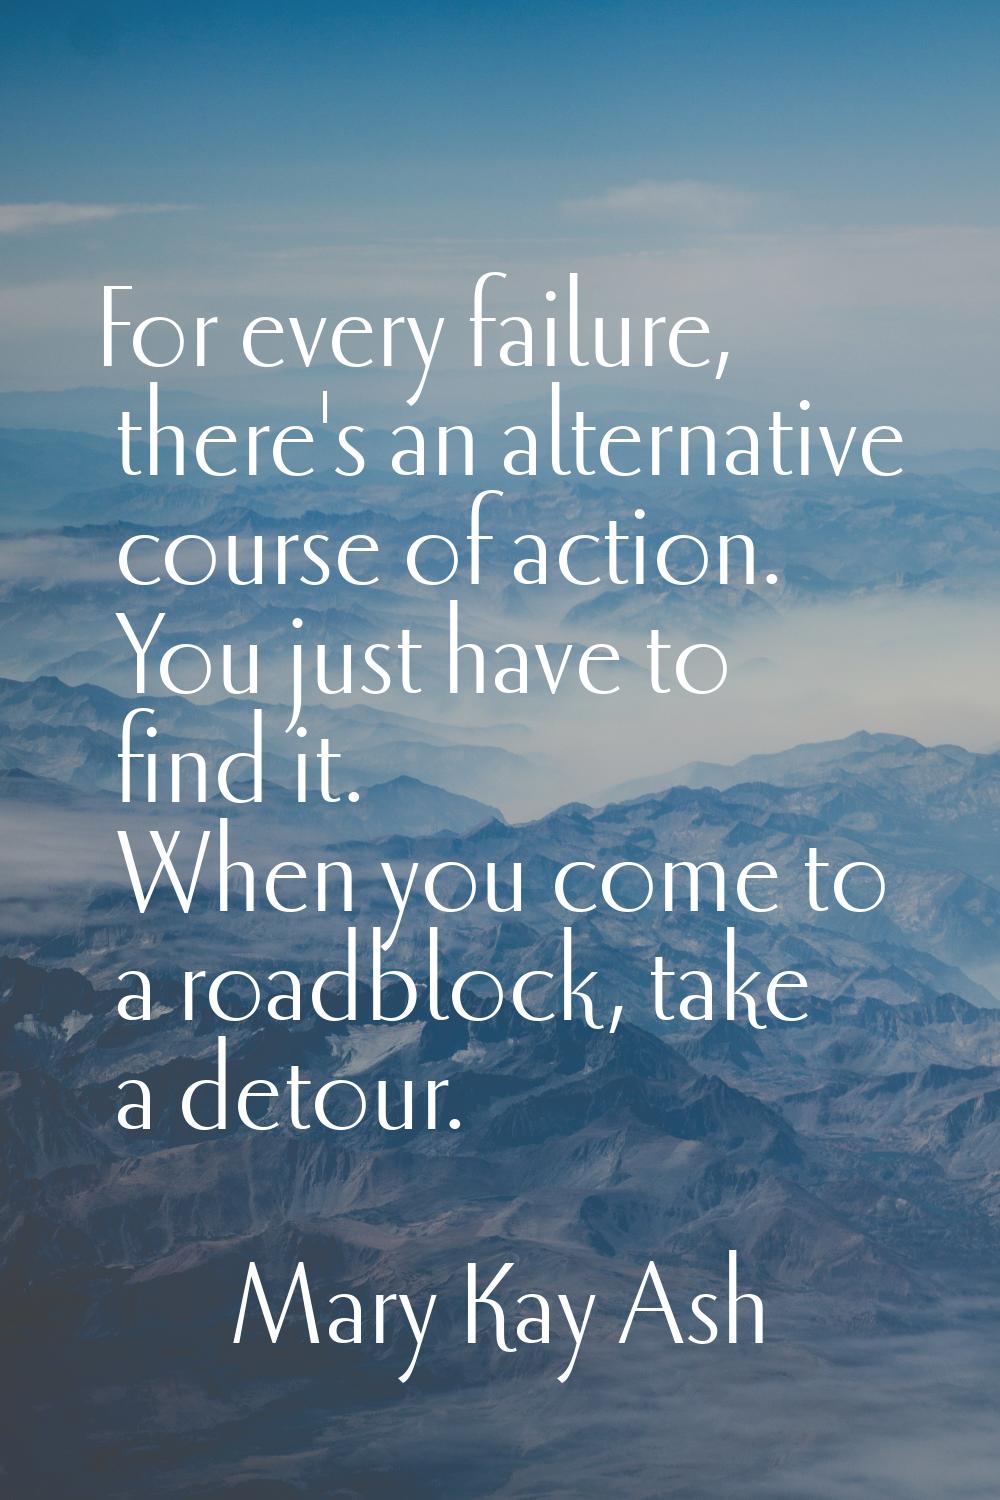 For every failure, there's an alternative course of action. You just have to find it. When you come